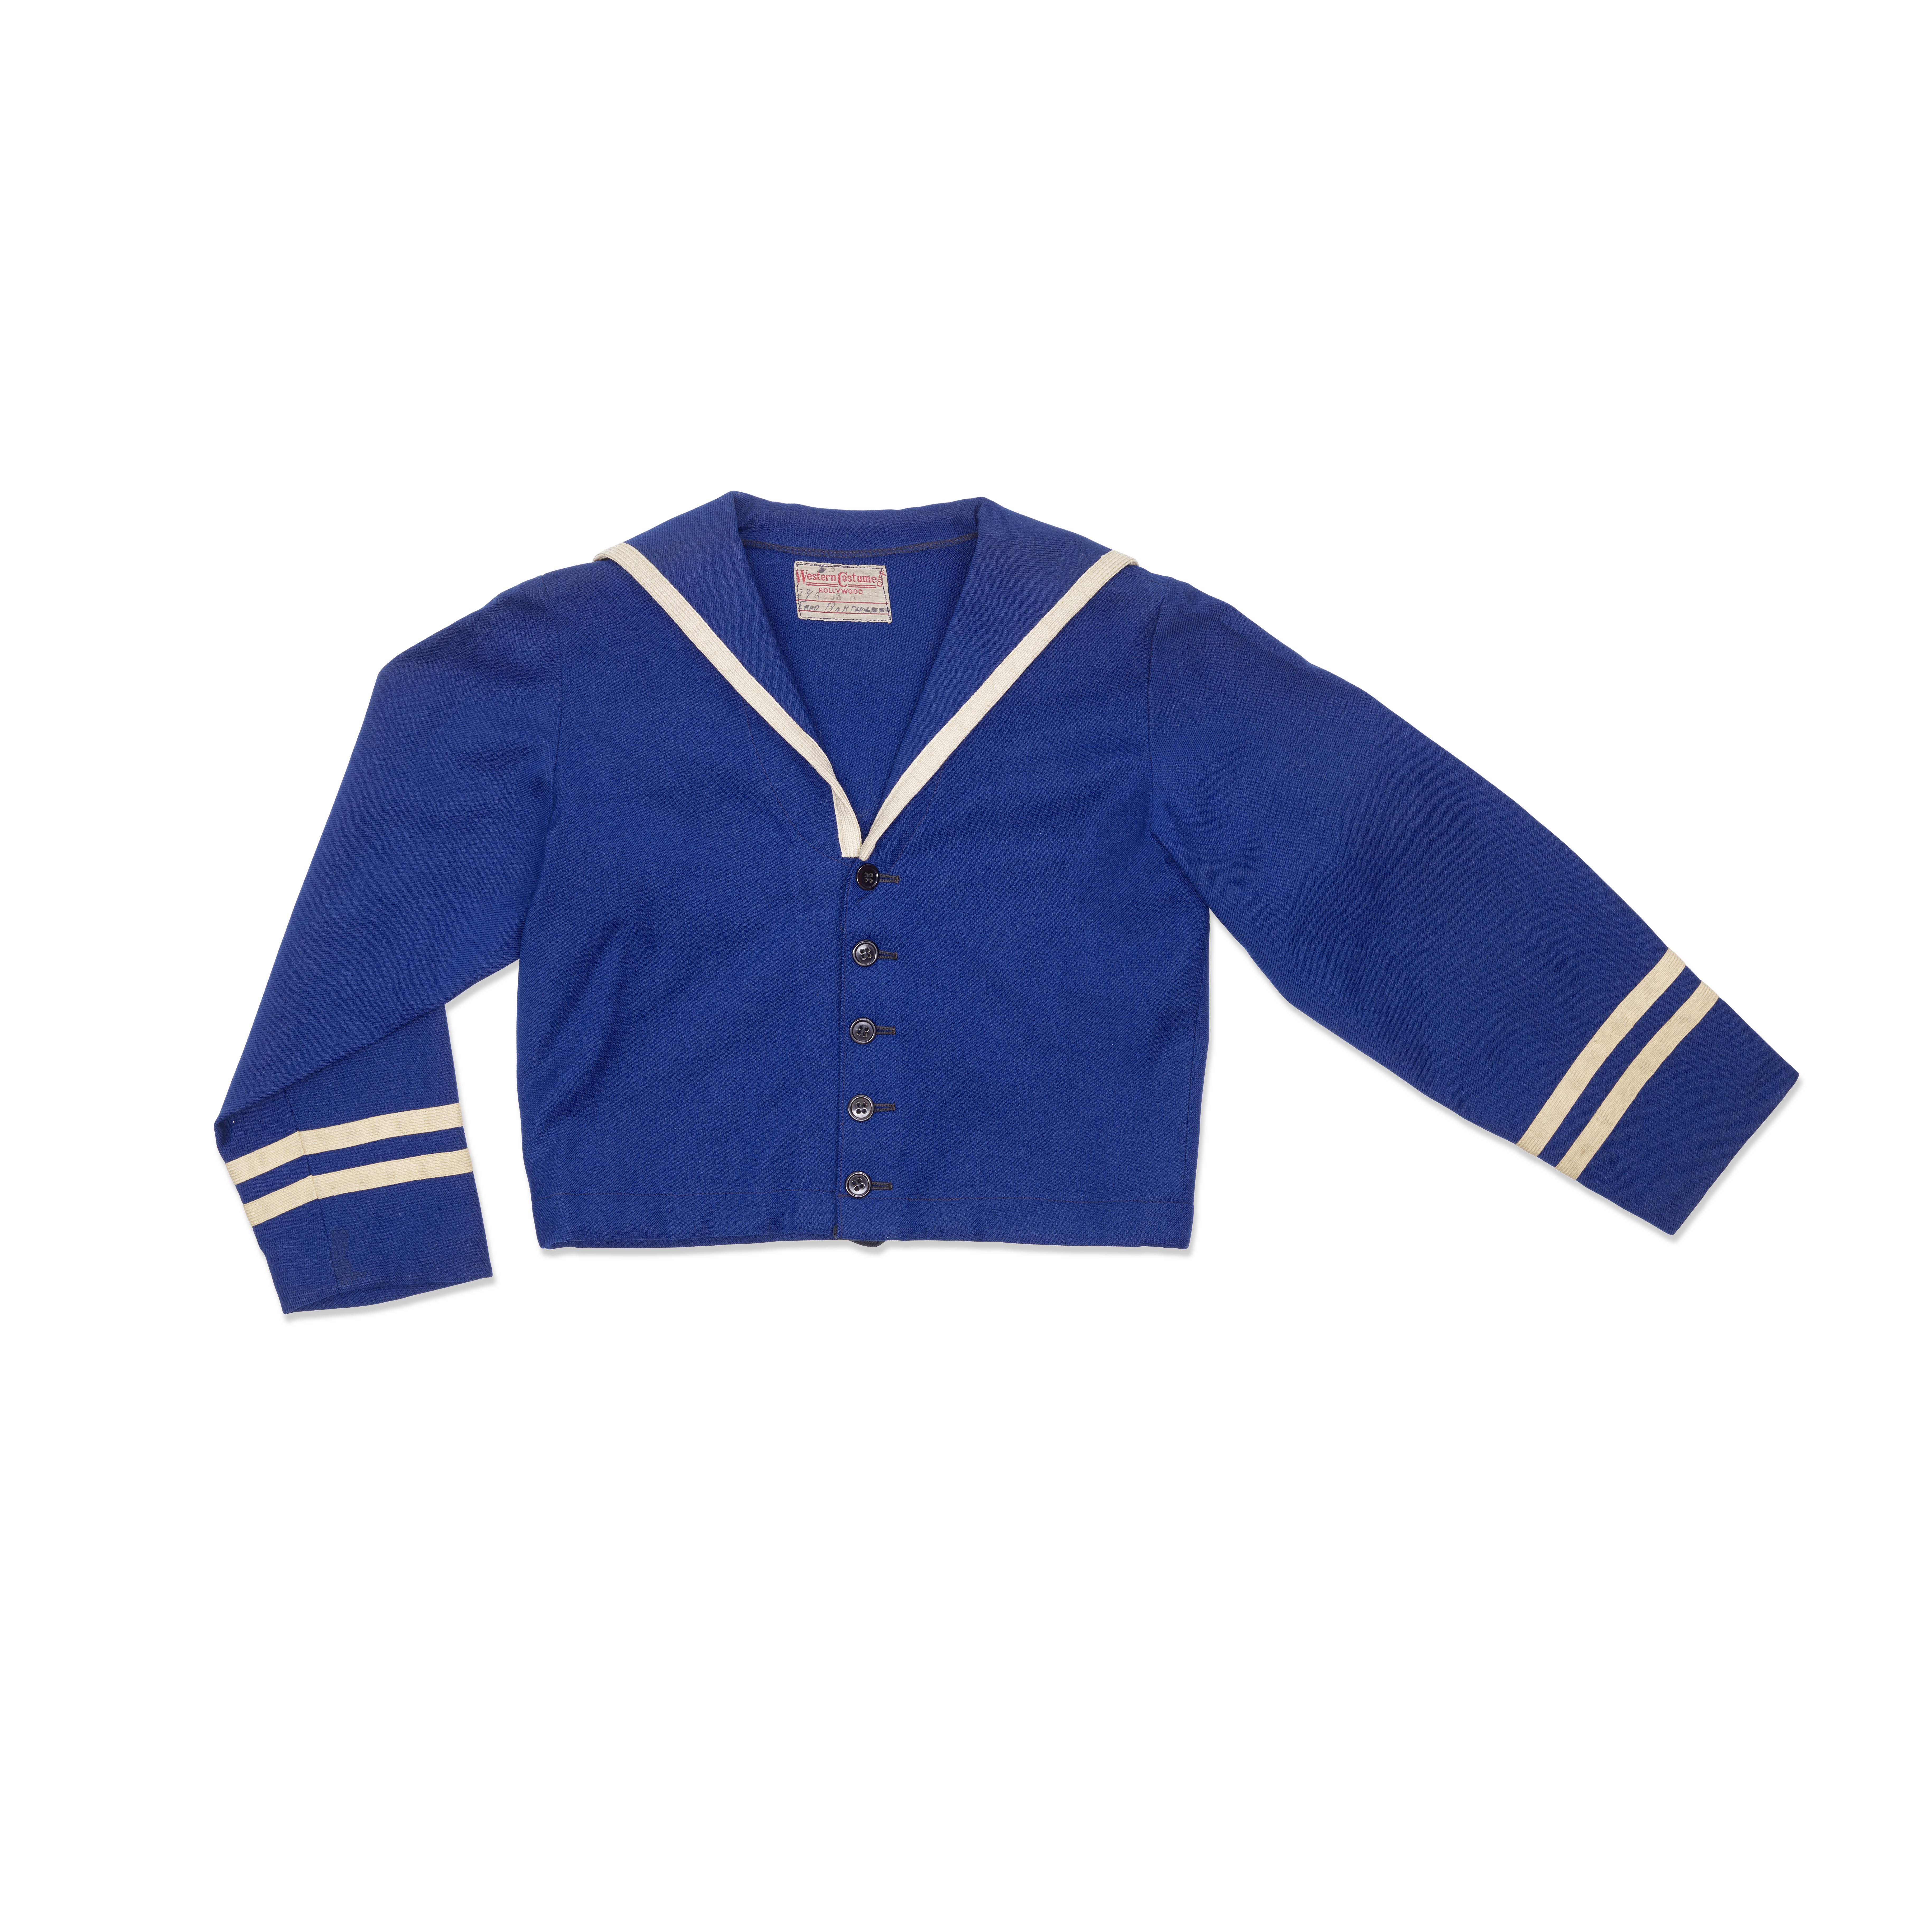 A Freddie Bartholomew sailor jacket from Little Lord Fauntleroy - Image 2 of 3